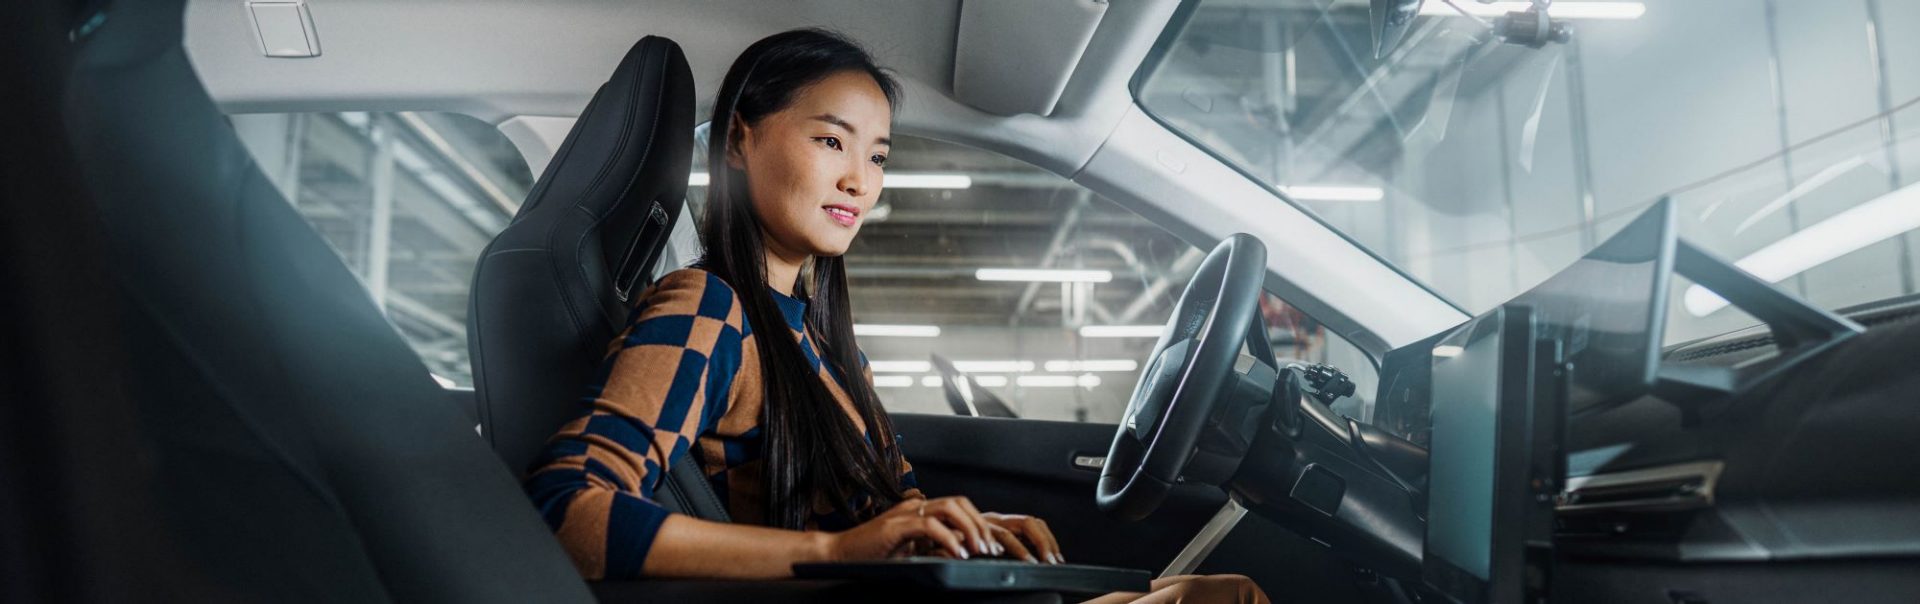 A women who works in Software Development is testing software in a BMW car.